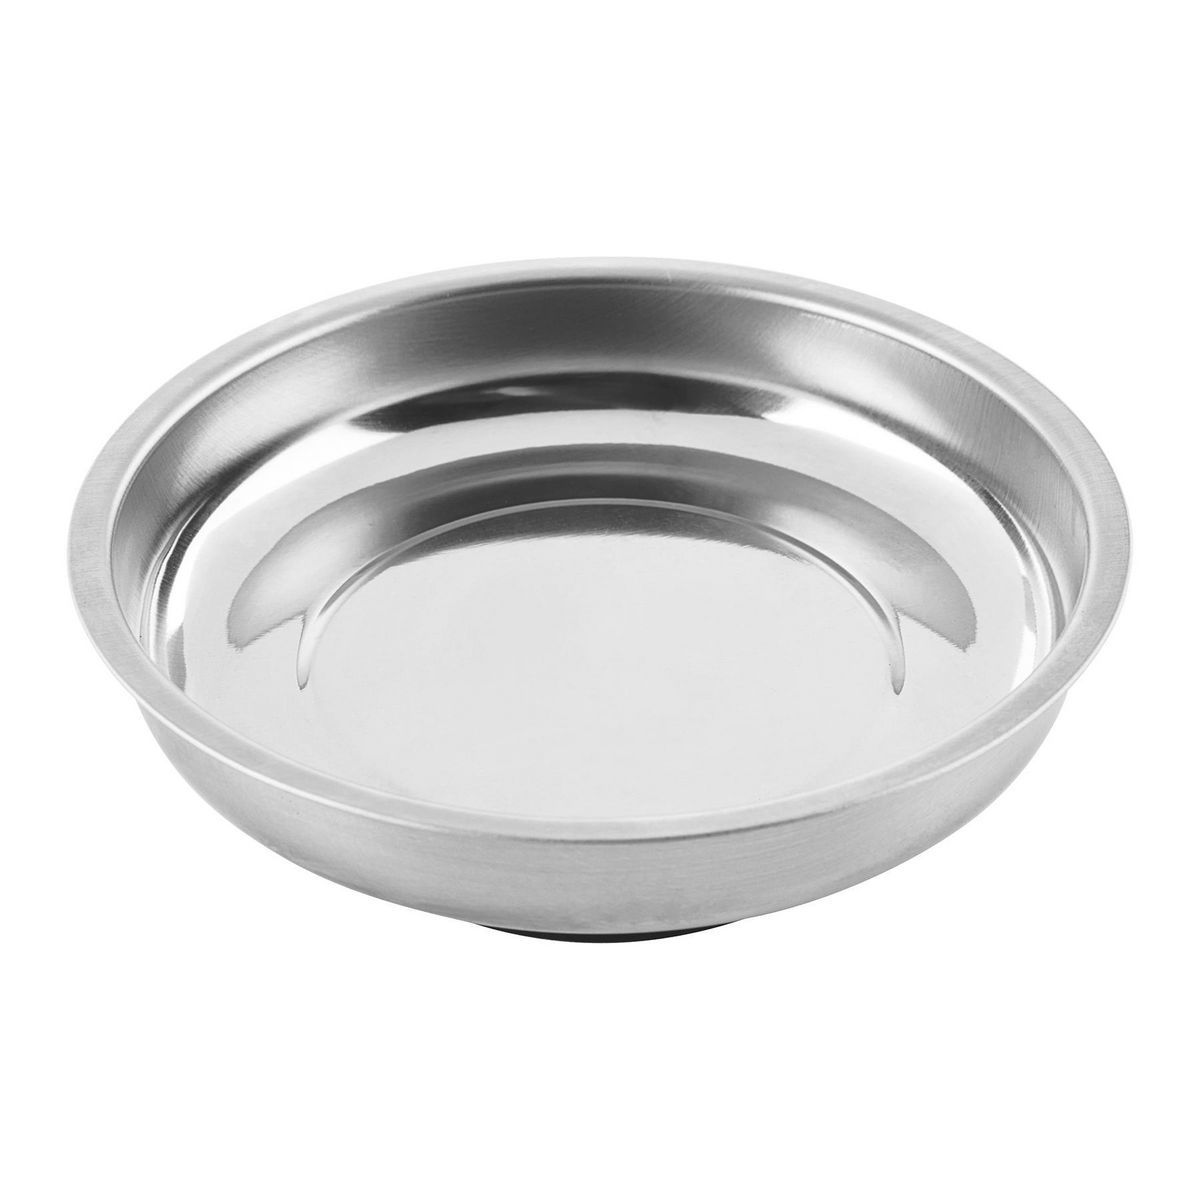 4 magnetic bowl - silver